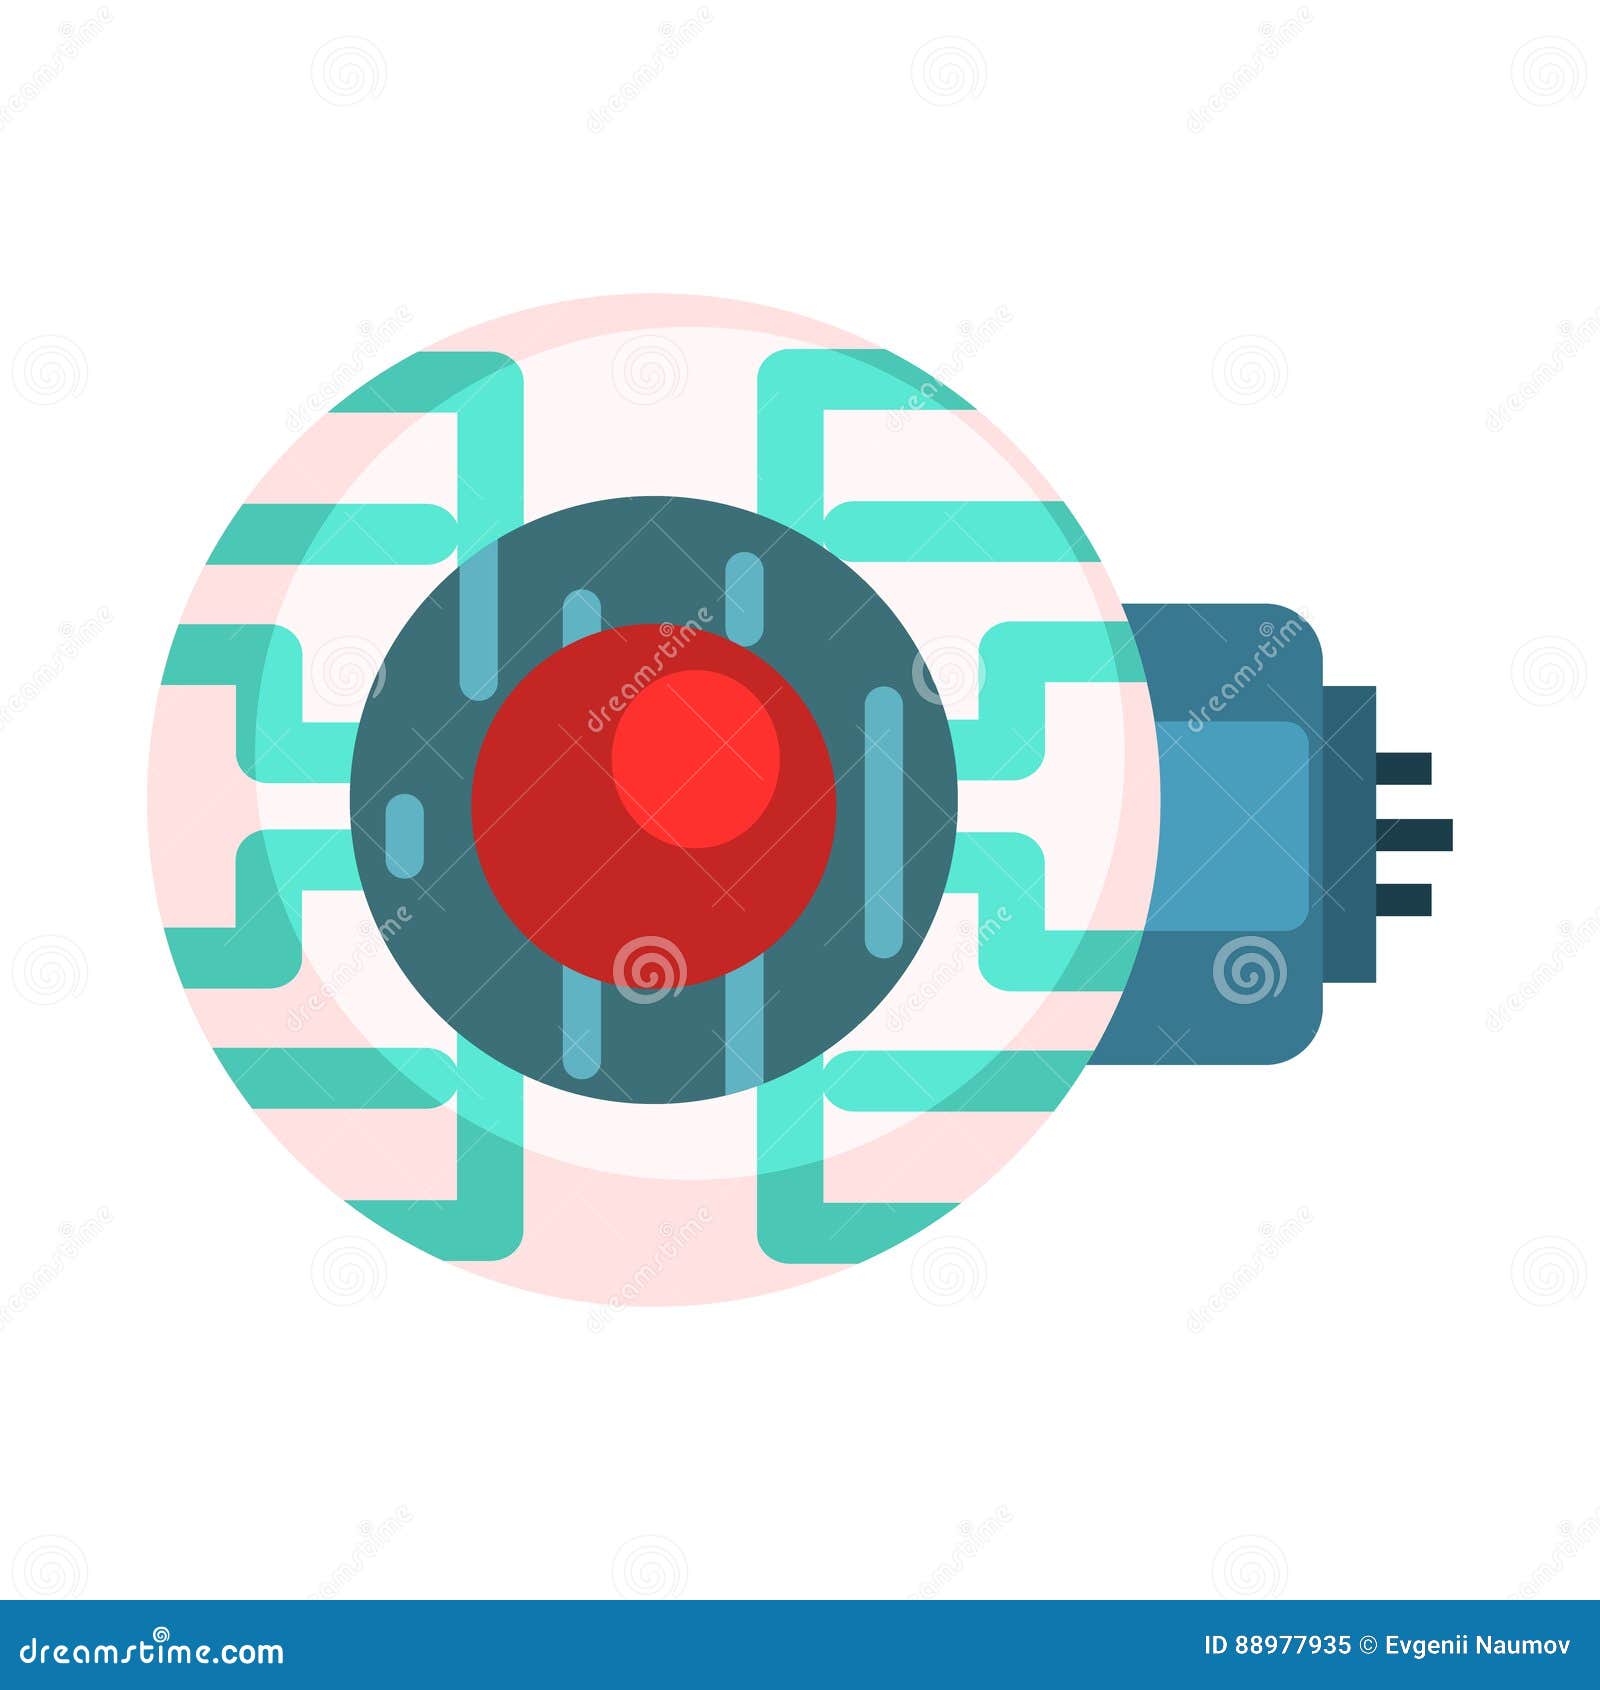 Electronic Eye for Android, Human Organ Replica, Part of Futuristic Robotic  and it Science Series of Cartoon Icons Stock Vector - Illustration of  android, future: 88977935